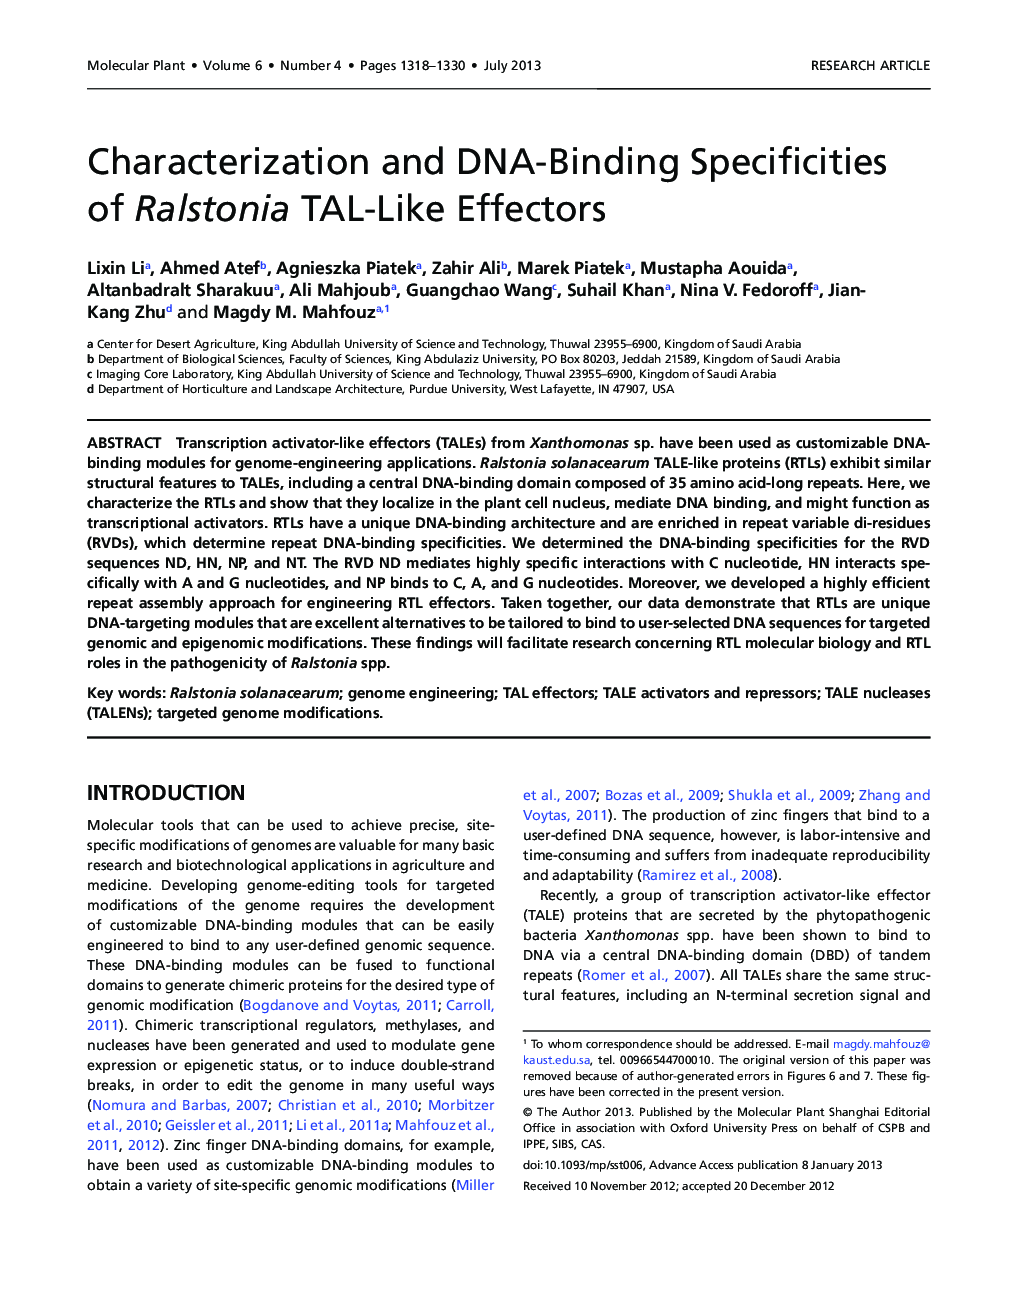 Characterization and DNA-Binding Specificities of Ralstonia TAL-Like Effectors 